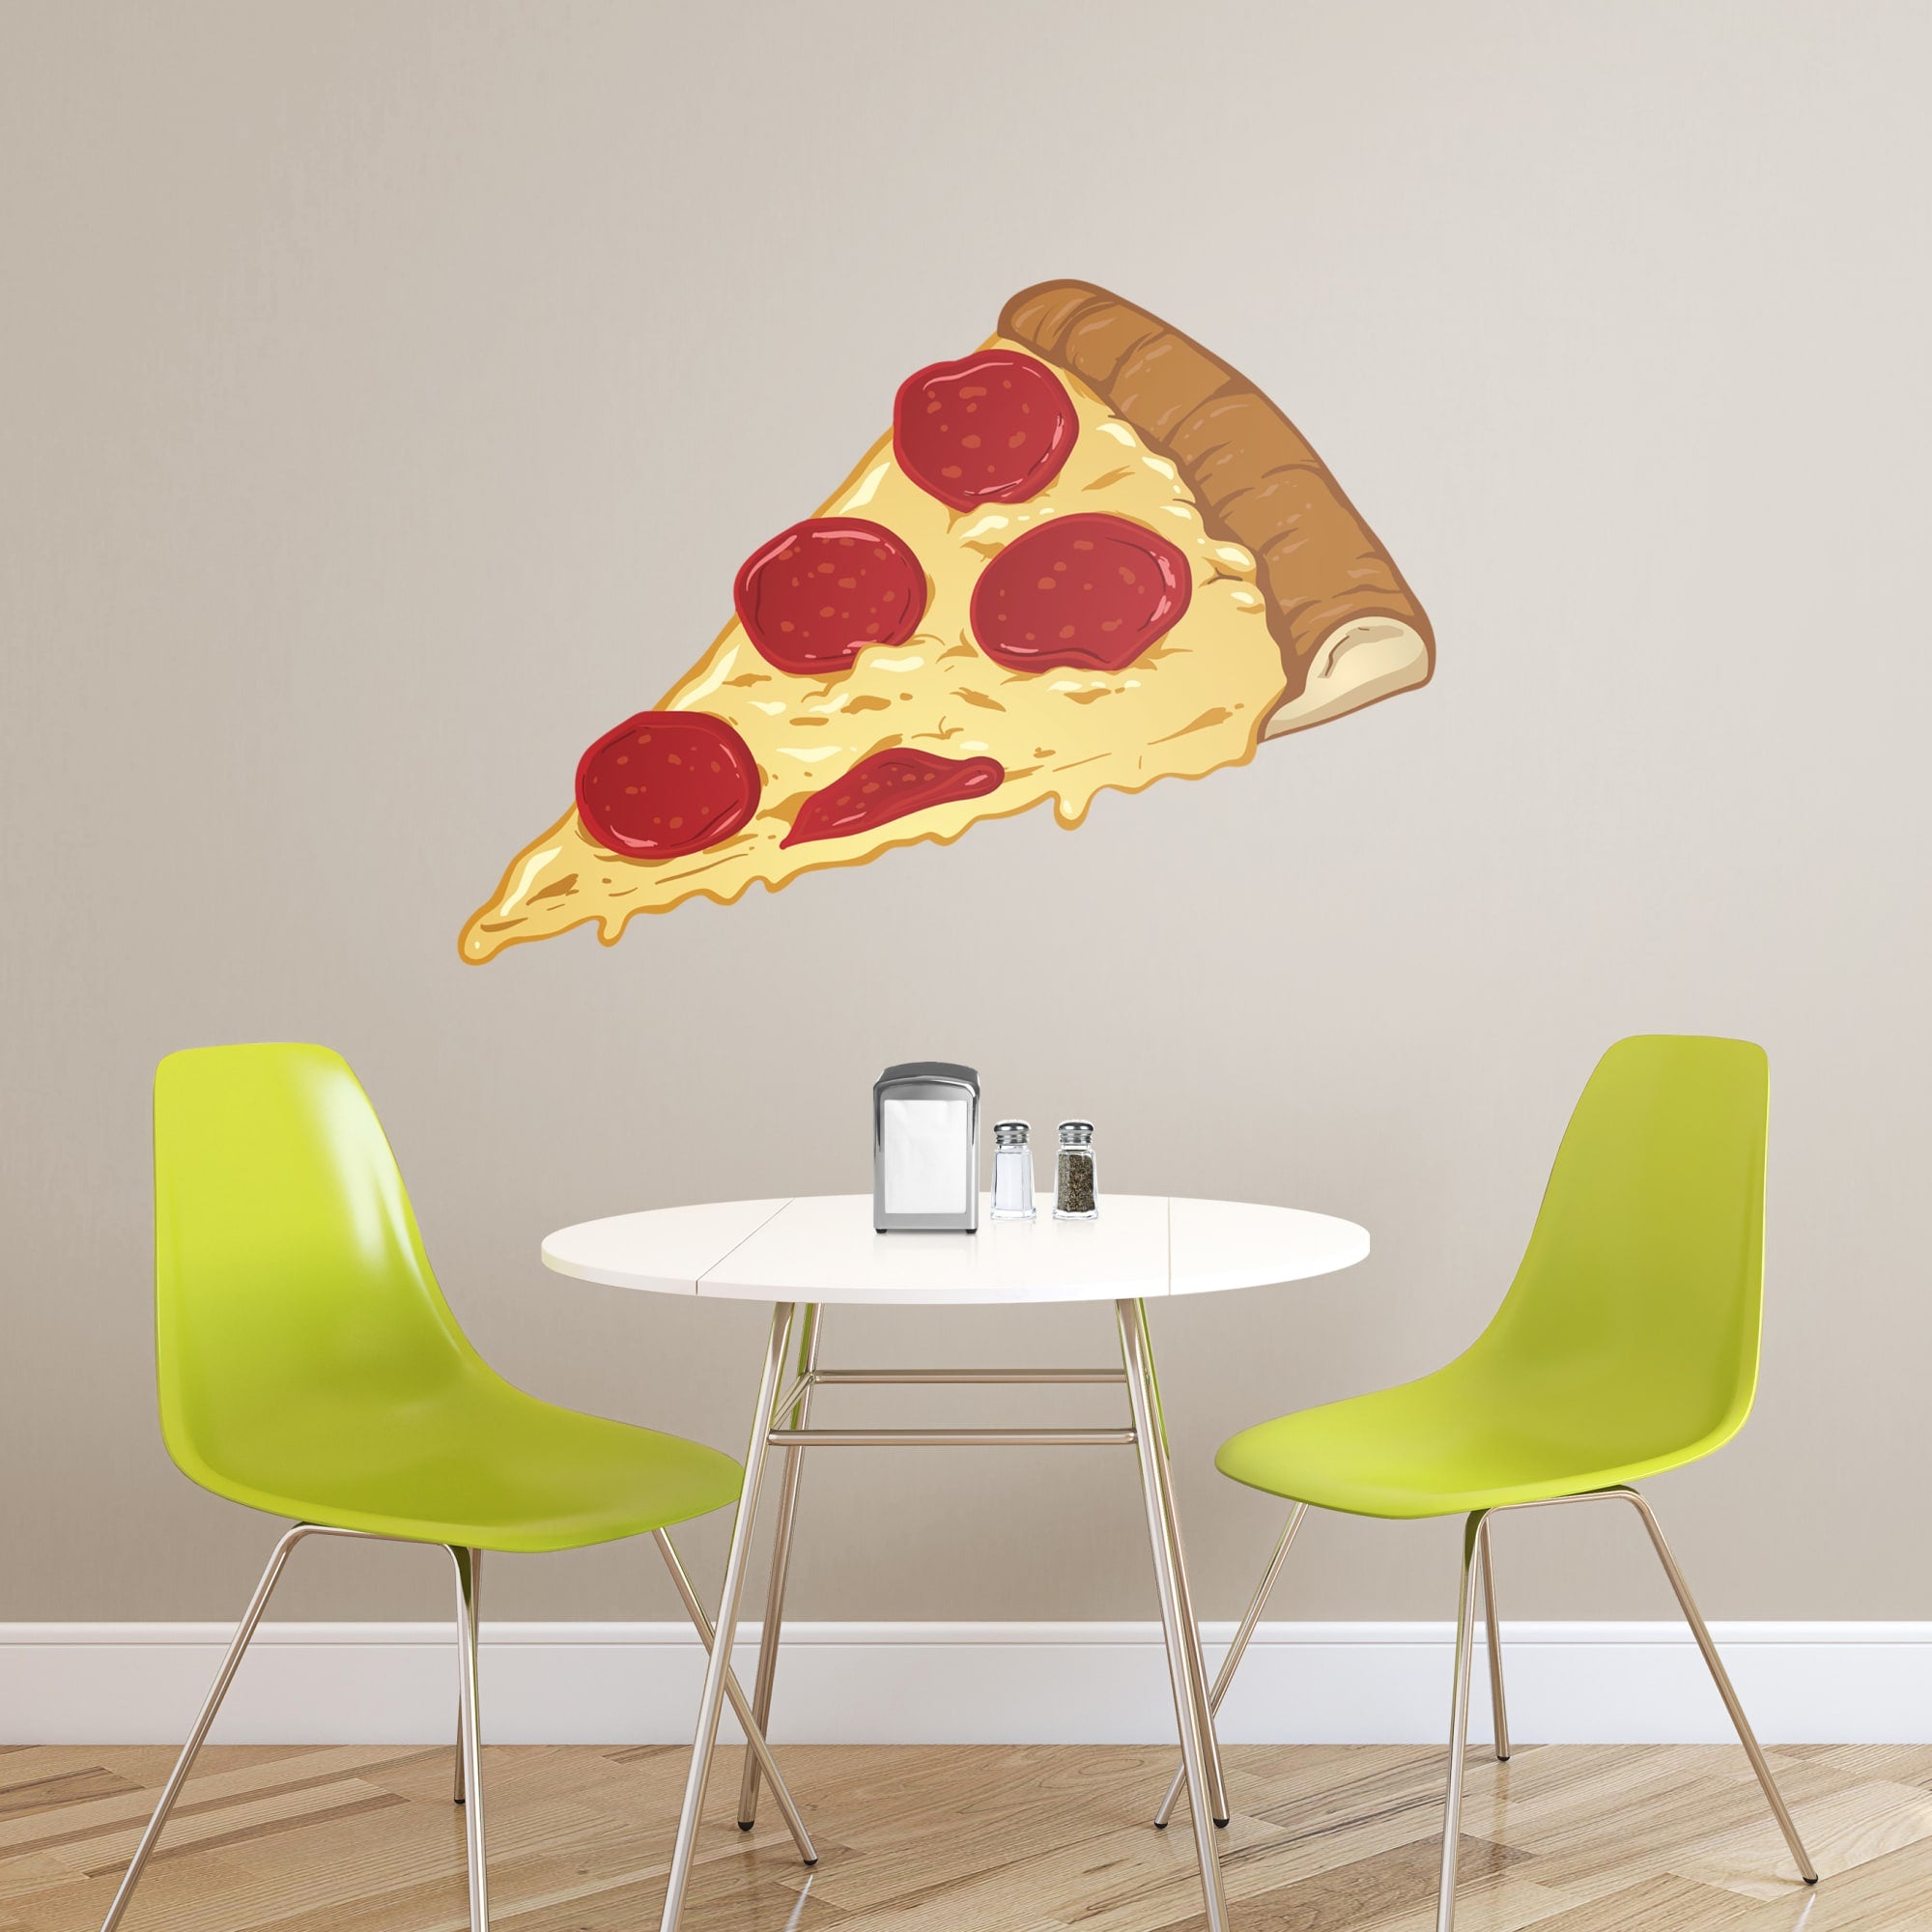 Pizza: Illustrated - Removable Vinyl Decal Giant Pizza + 2 Decals (49"W x 35"H) by Fathead